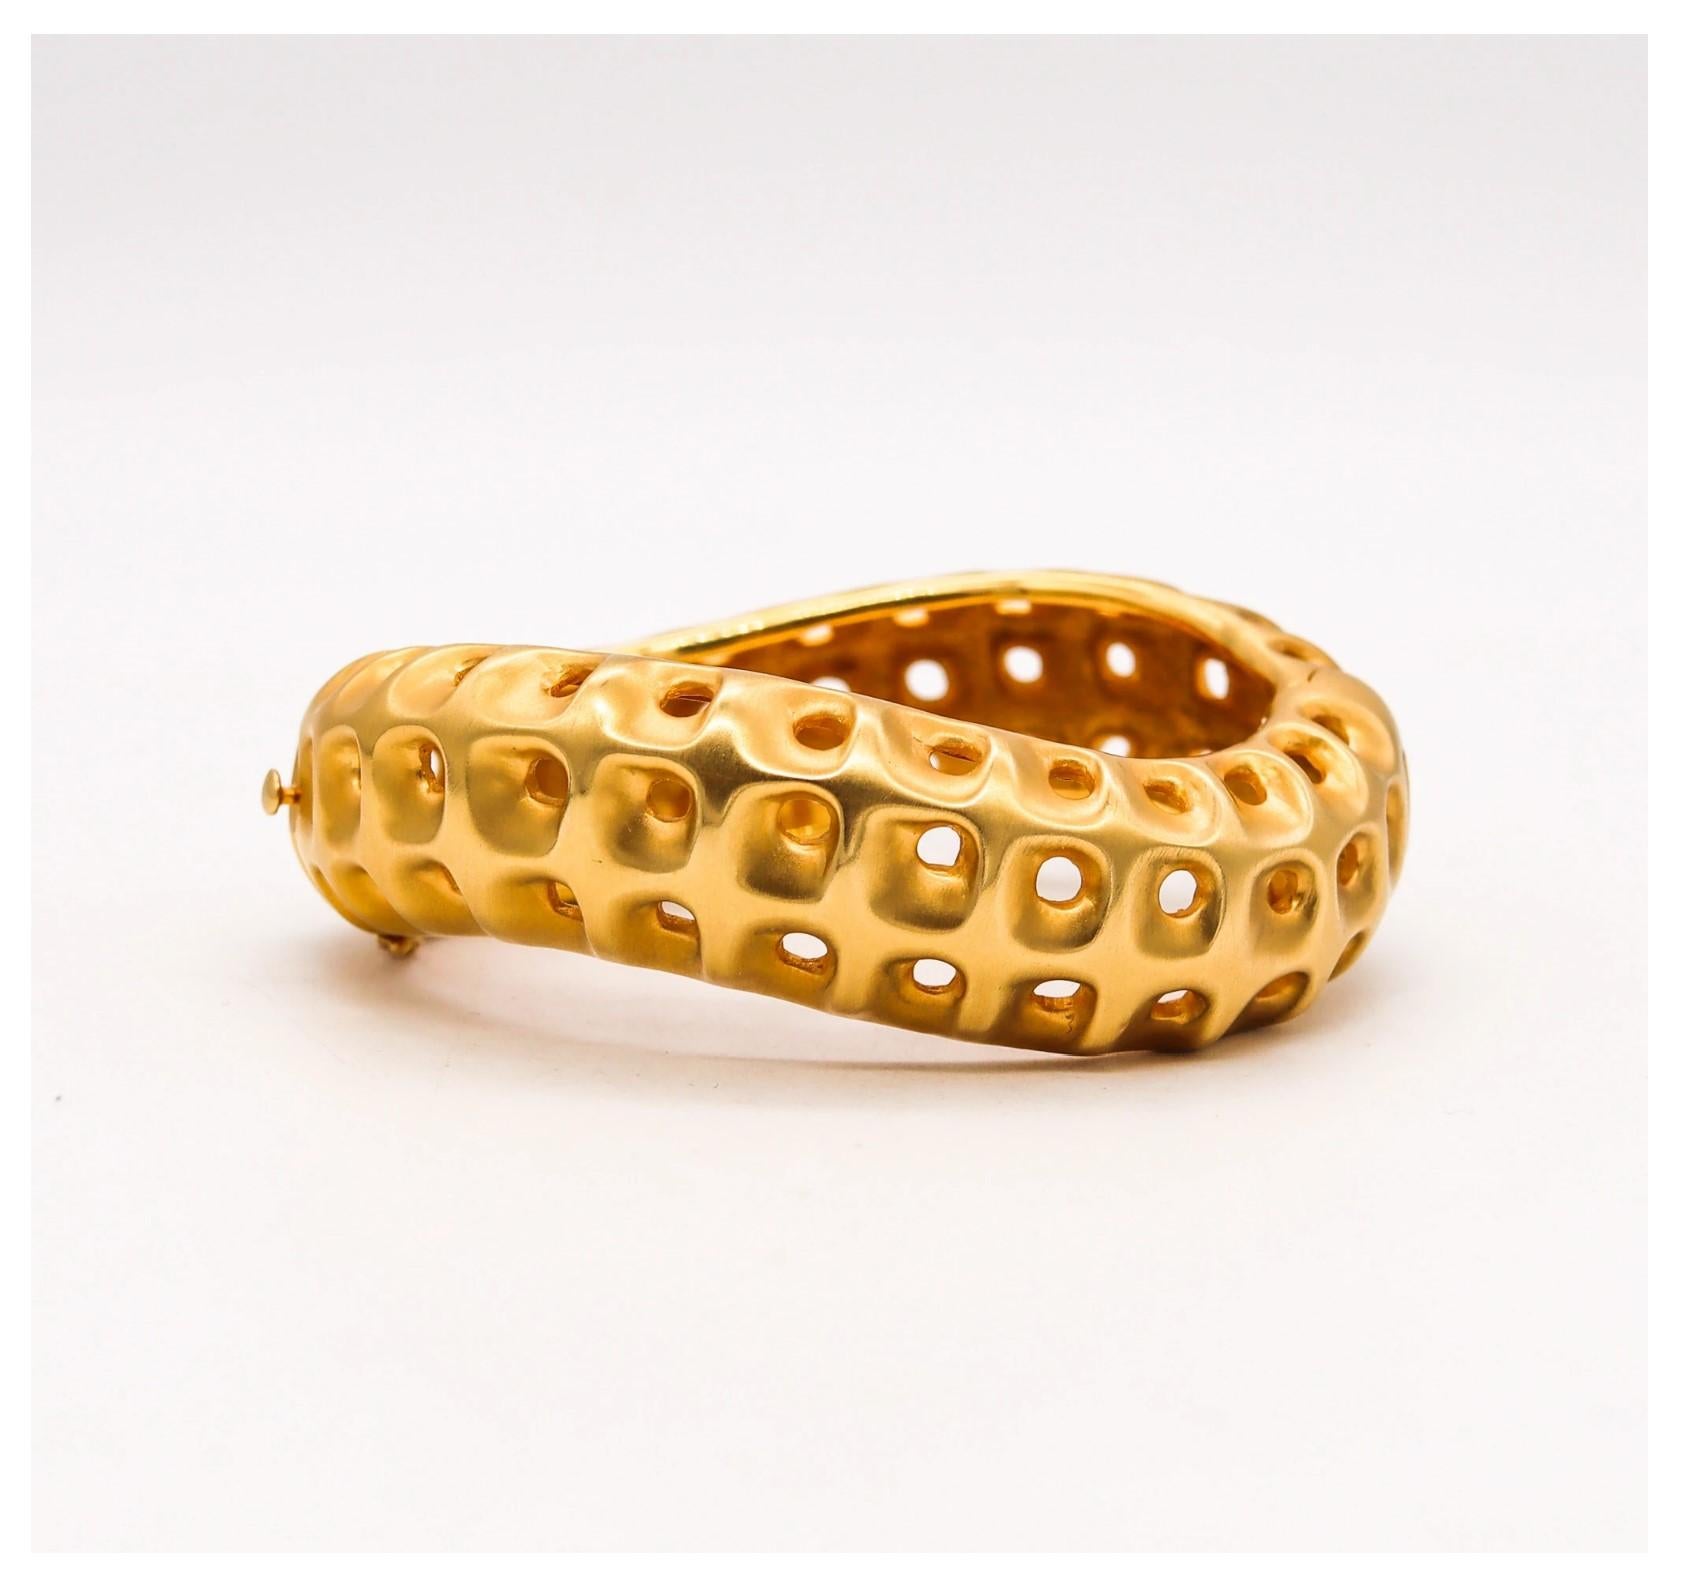 Honeycombs wavy bracelet designed by Angela Cummings.

Beautiful three-dimensional piece, created by Cummings at her studio in New York city, back in the 1987. This gorgeous wavy bracelet has been carefully crafted, with an intricate patterns of